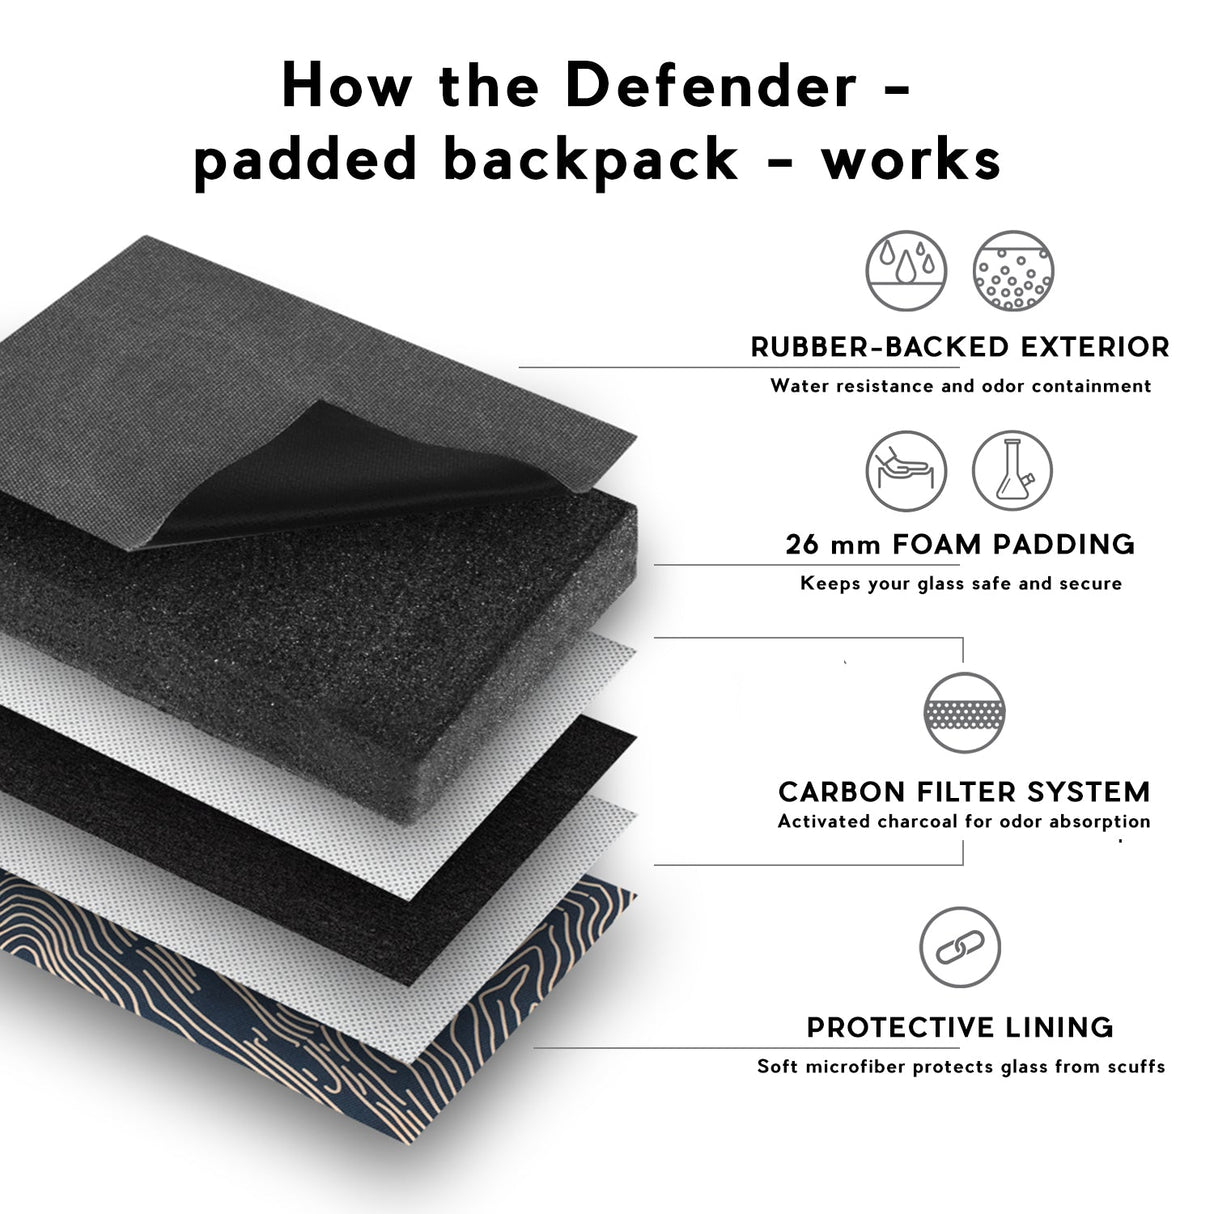 Revelry Supply 'The Defender' smell proof backpack layers demonstrating padding and carbon filter system